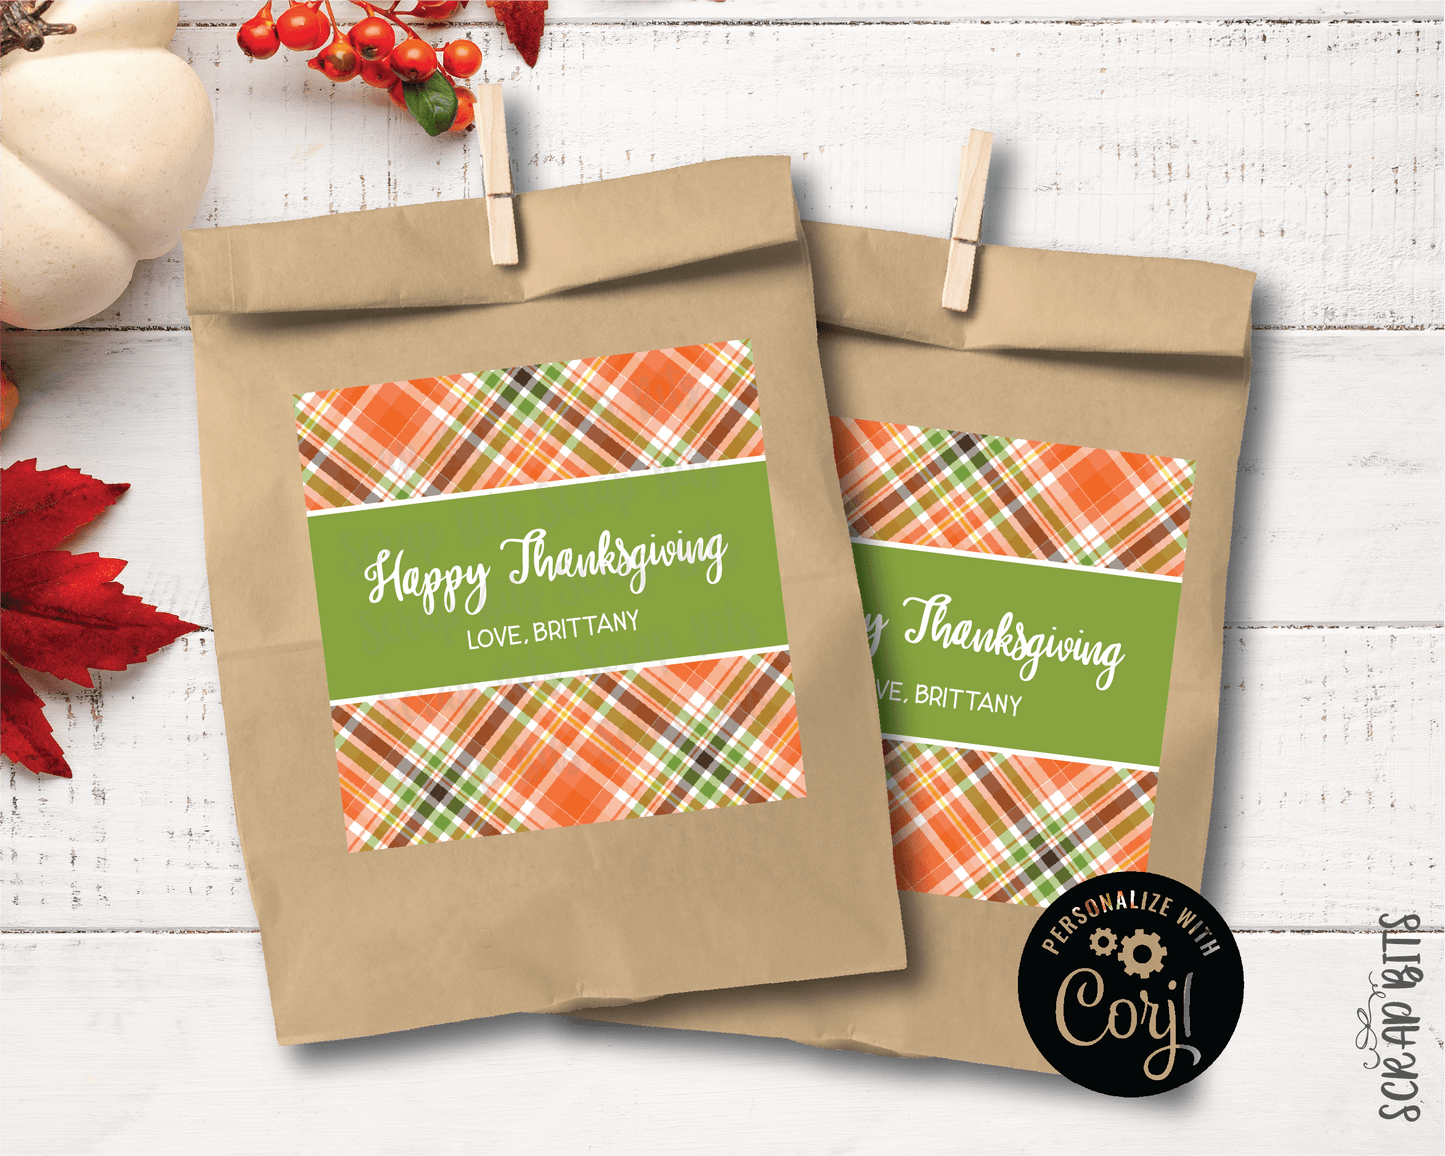 Orange & Green Plaid Happy Thanksgiving Tags, Printable Thanksgiving Tags, Instant Download Editable Template - Scrap Bits